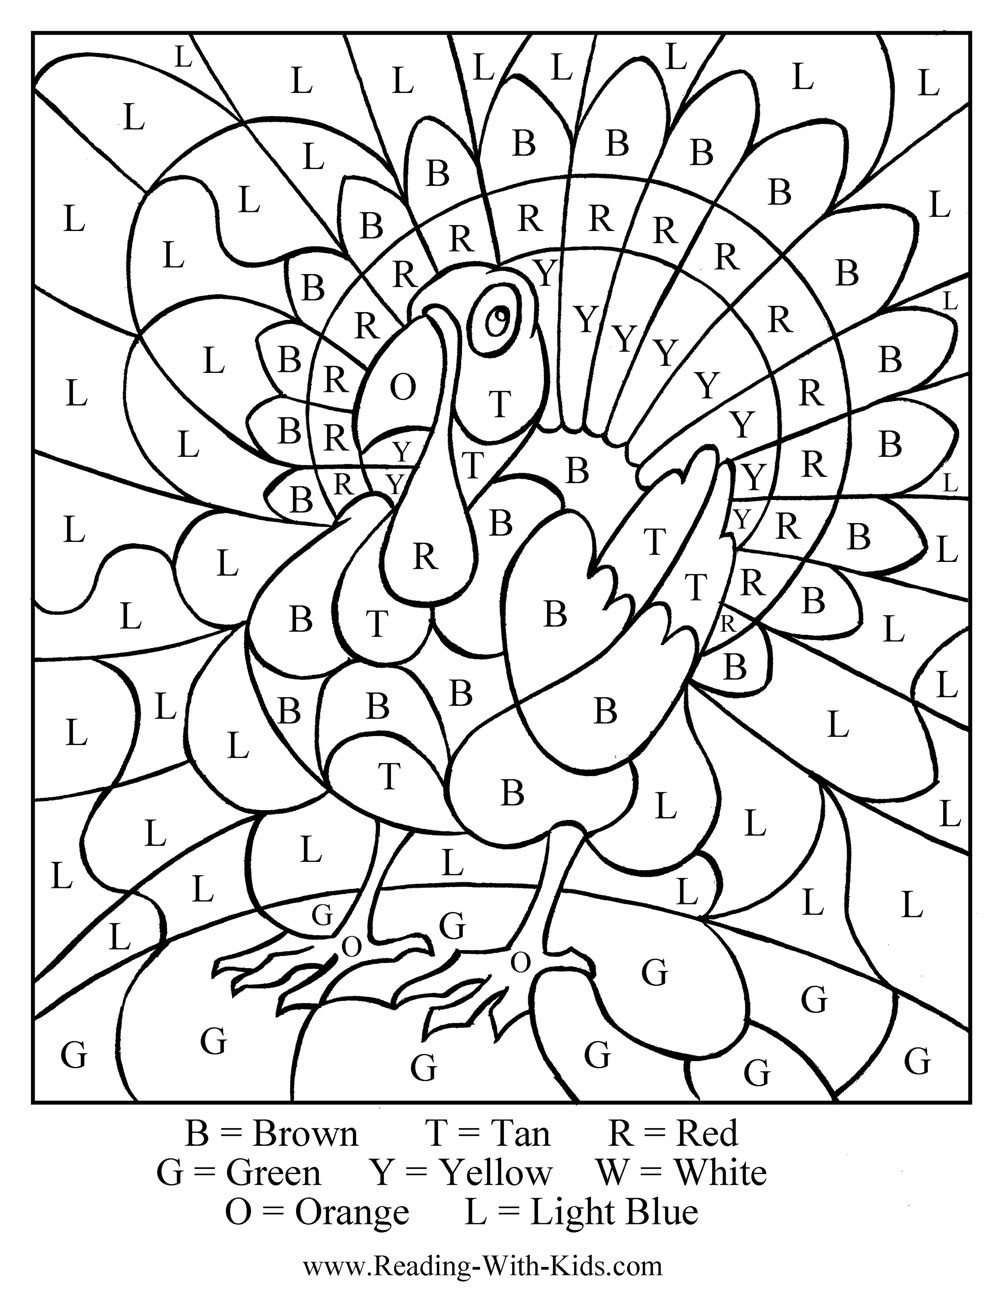 Free Coloring Games For Kids
 Free Thanksgiving Coloring Pages & Games Printables